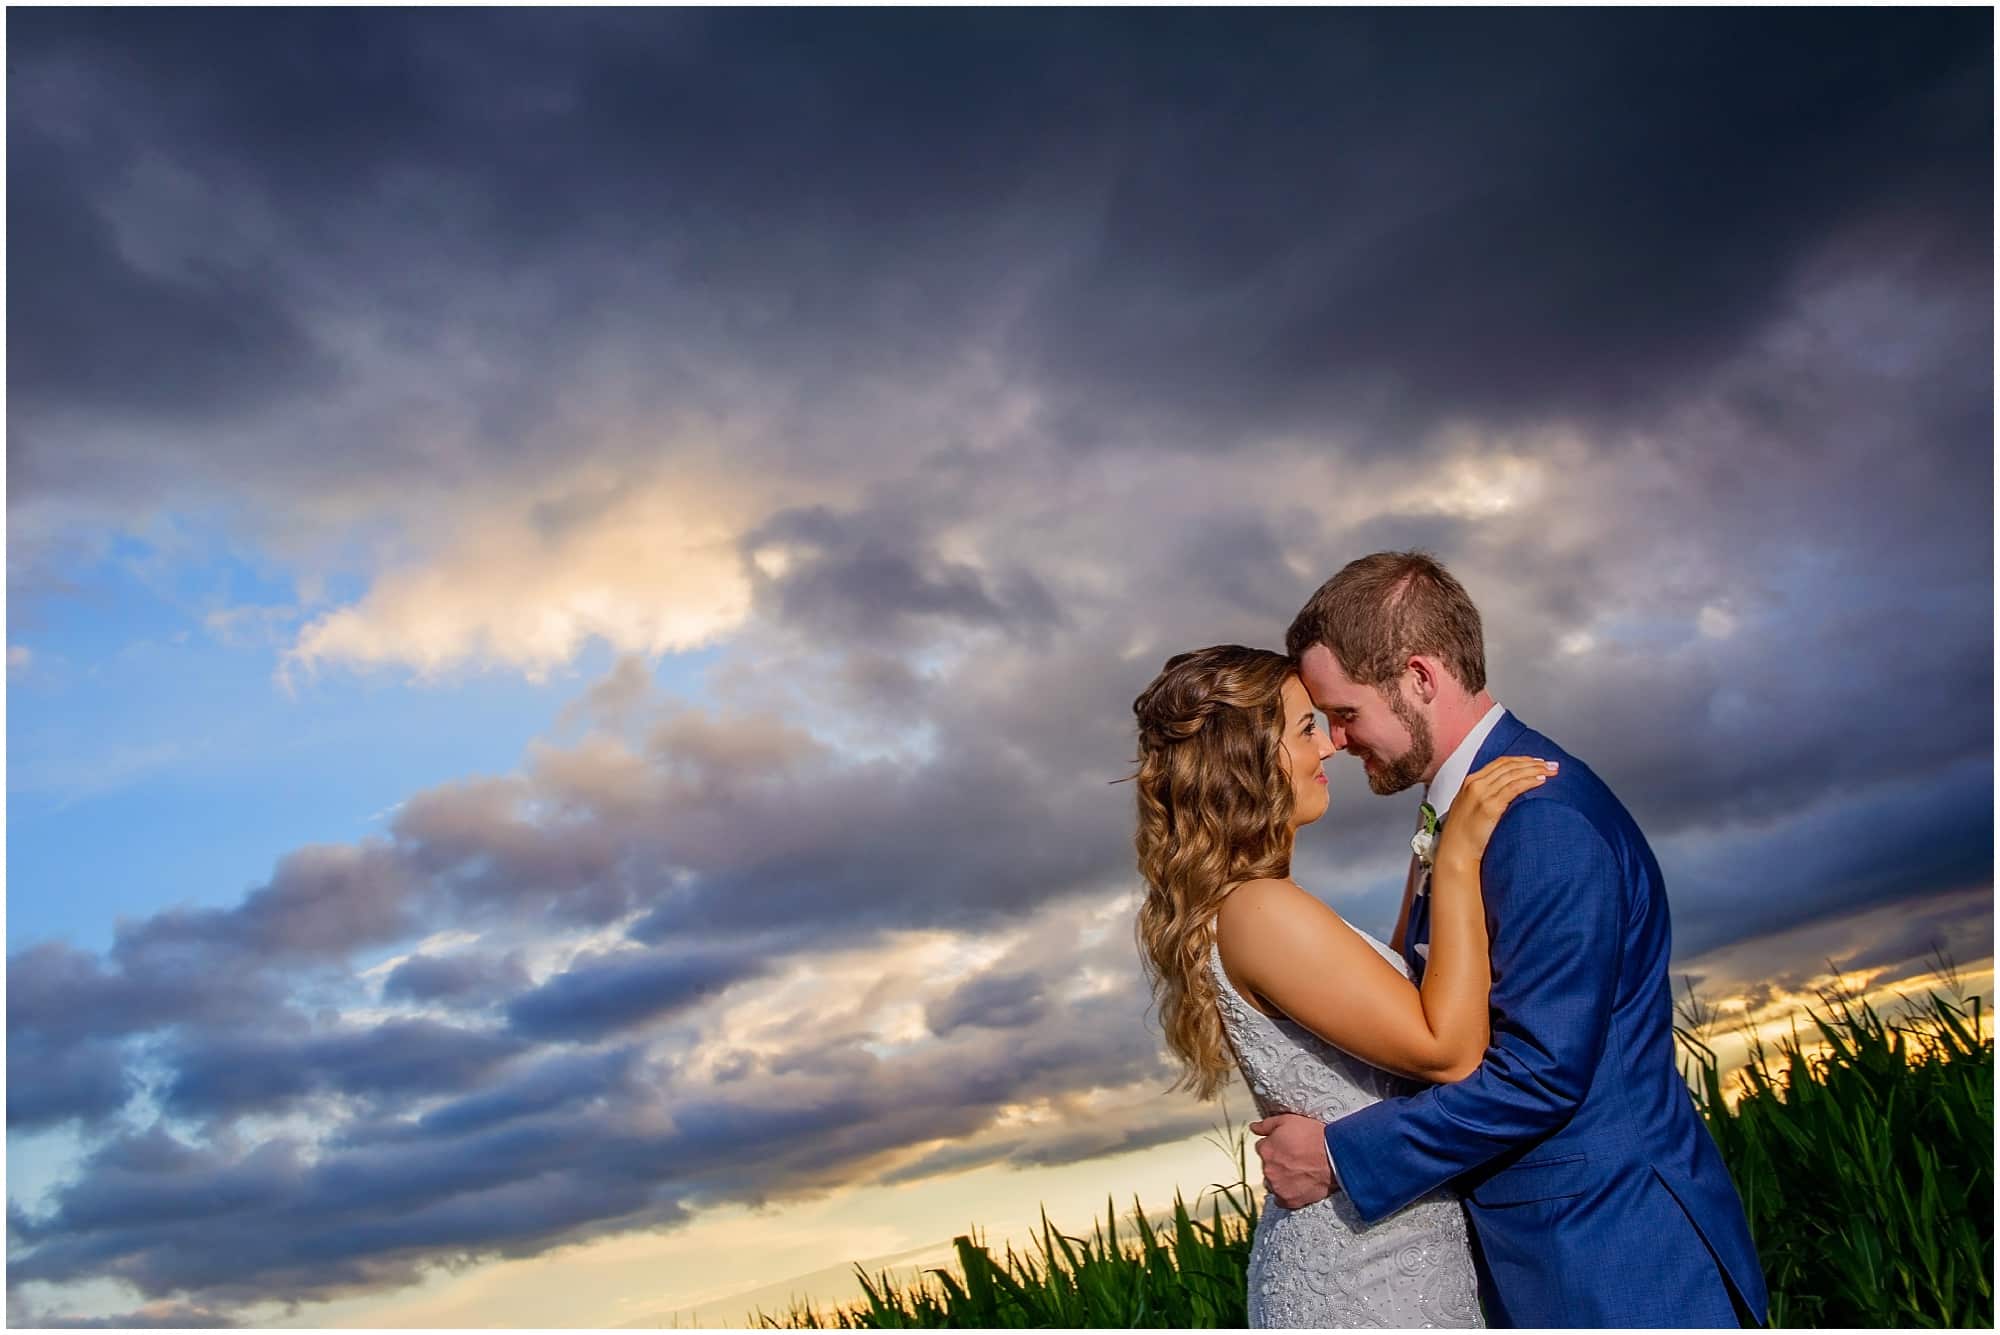 emerson creek wedding events bride and groom with storm clouds